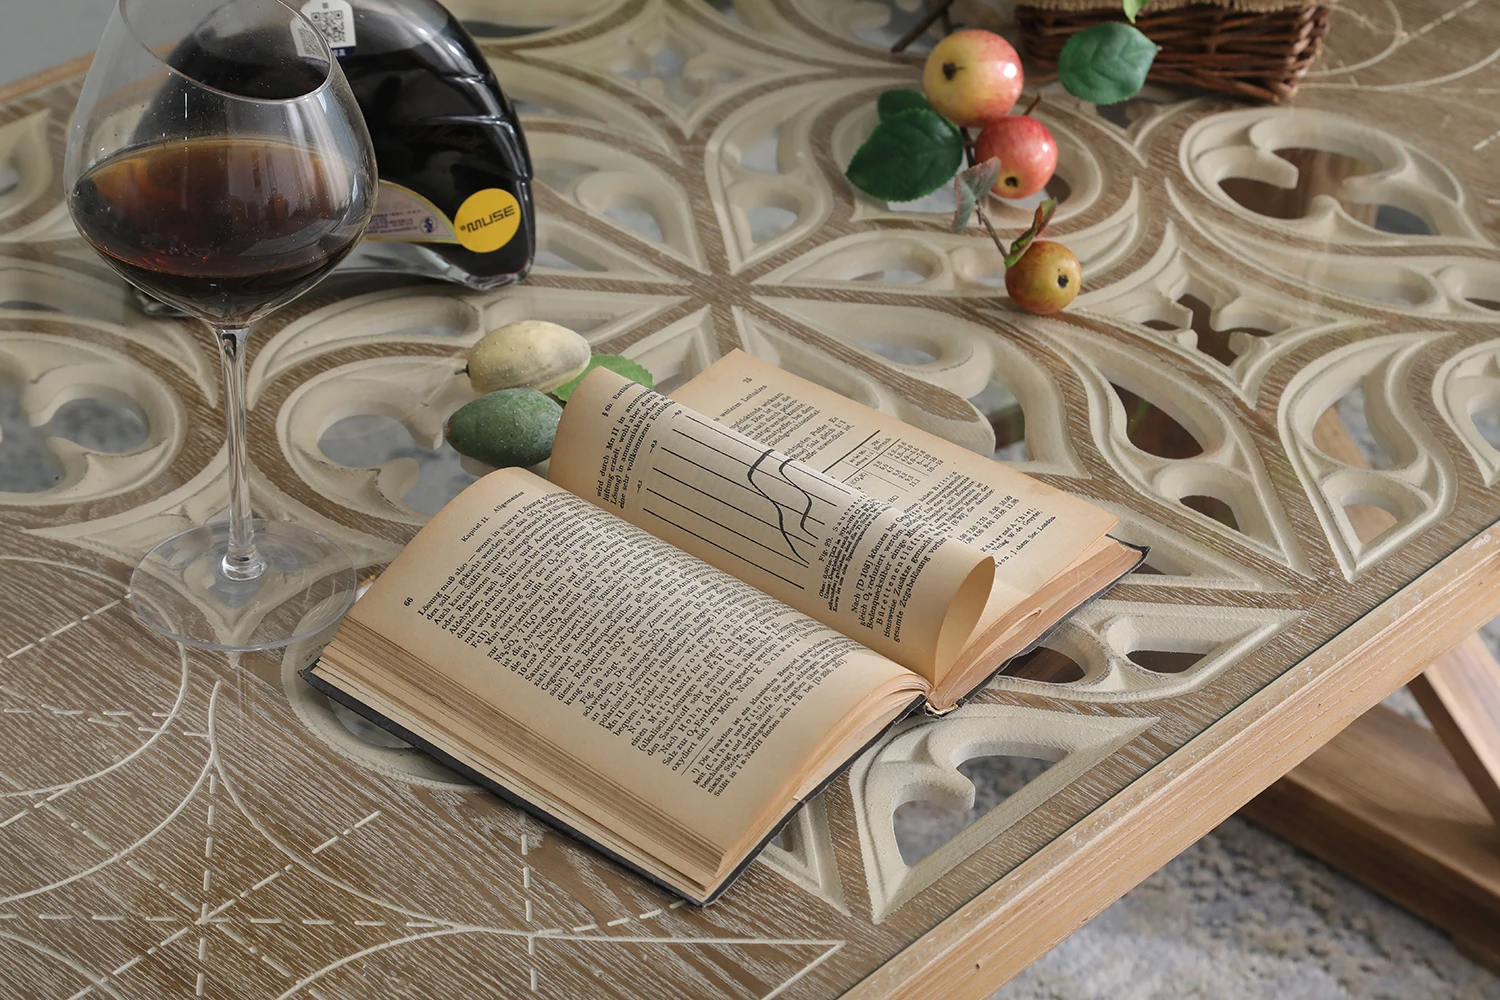 
Chinese manufacturers direct, antique table carved wooden table tempered glass surface 